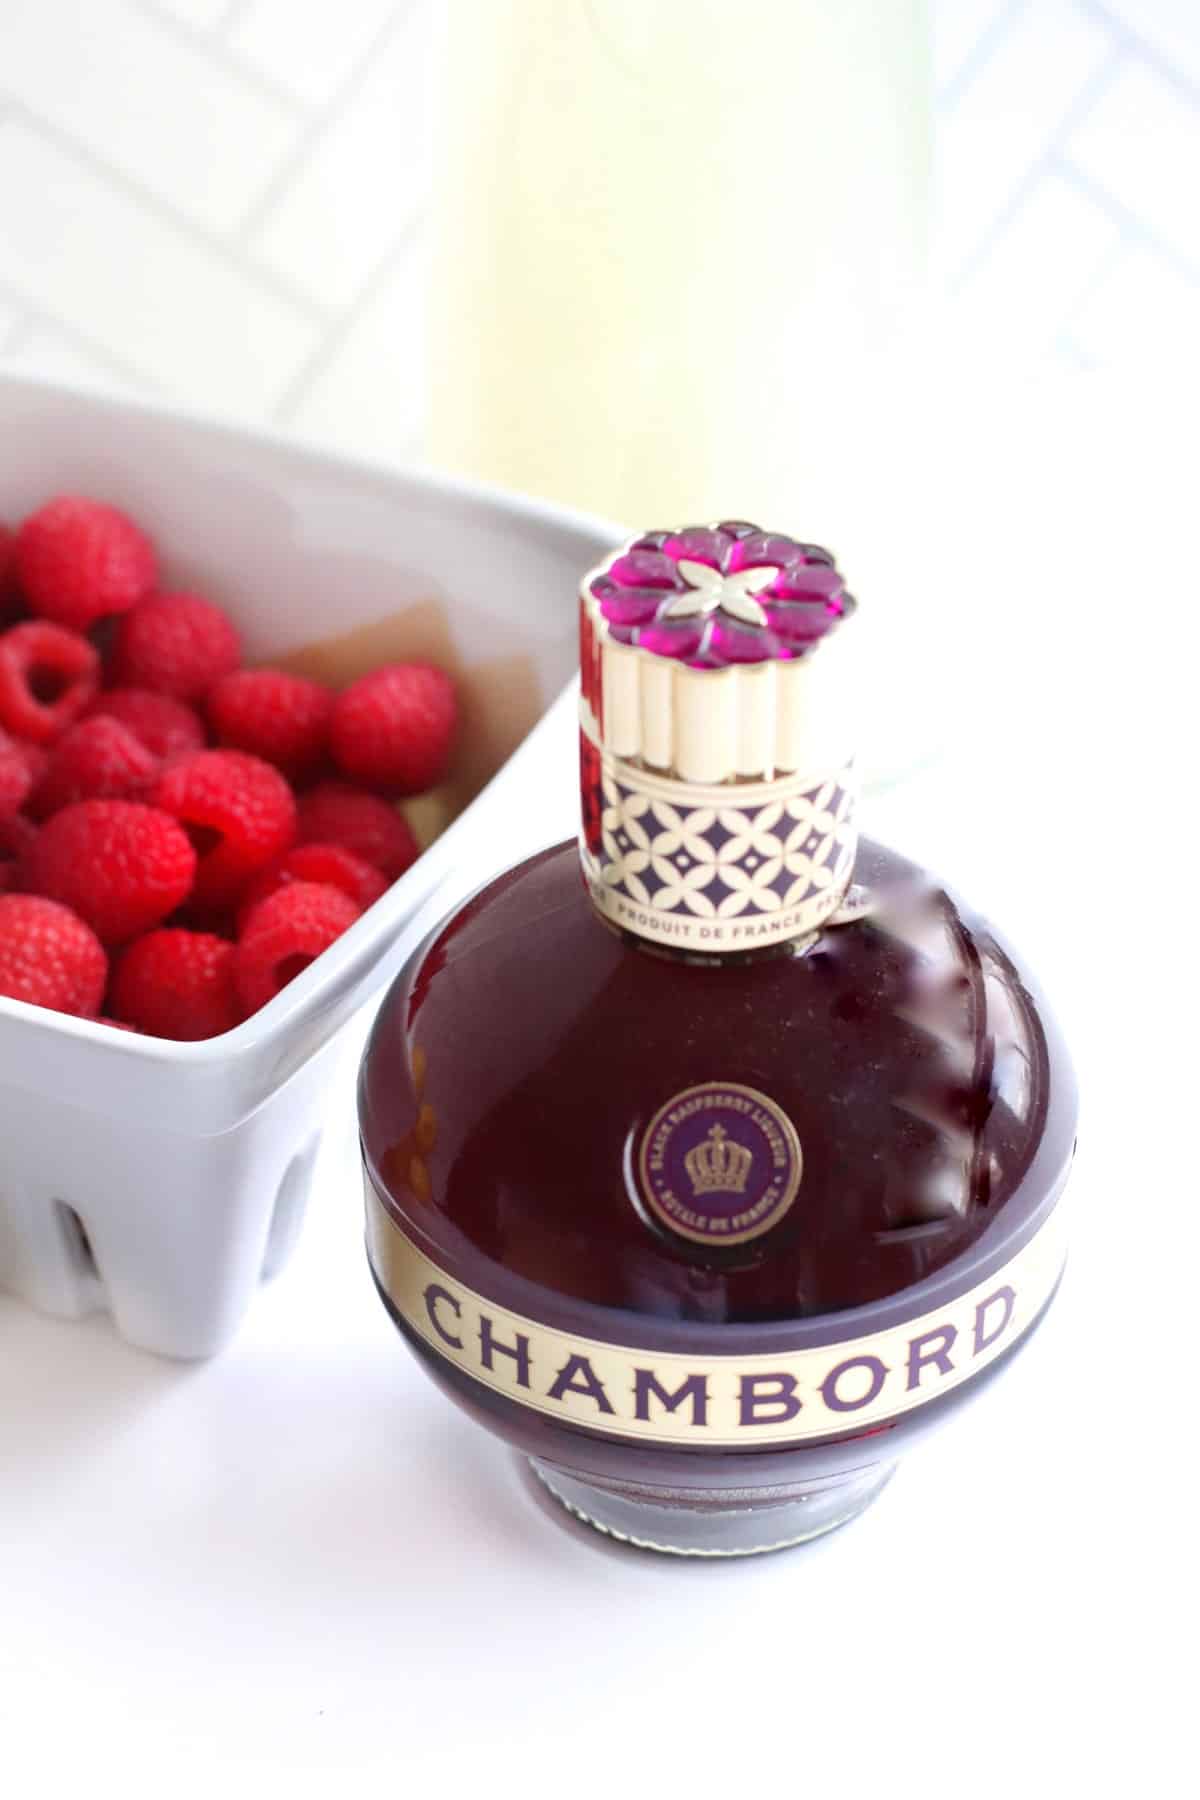 A bottle of Chambord with raspberries